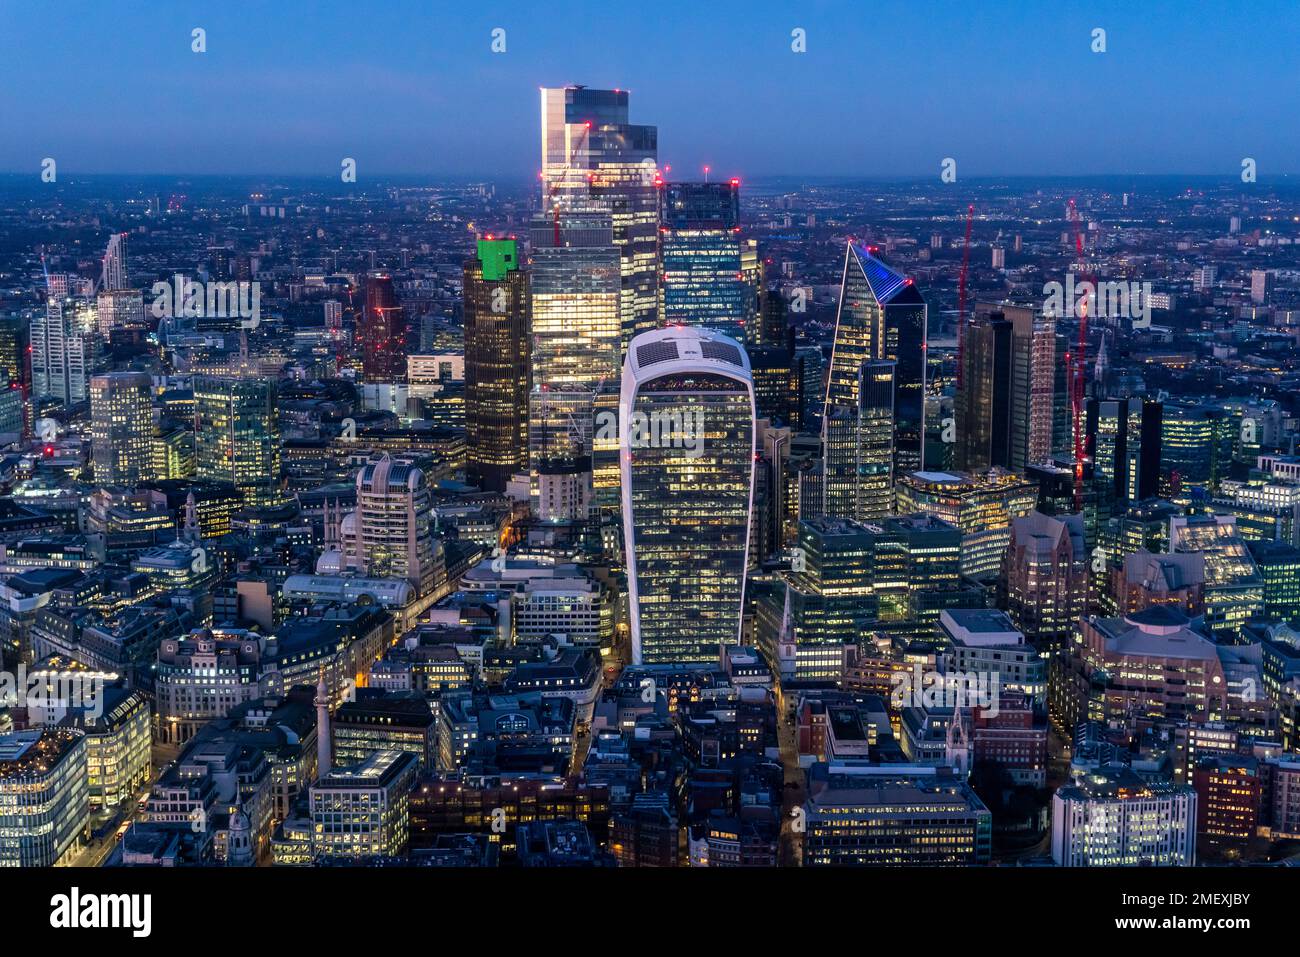 An Early Evening View Of The City of London from The Shard, London, UK. Stock Photo